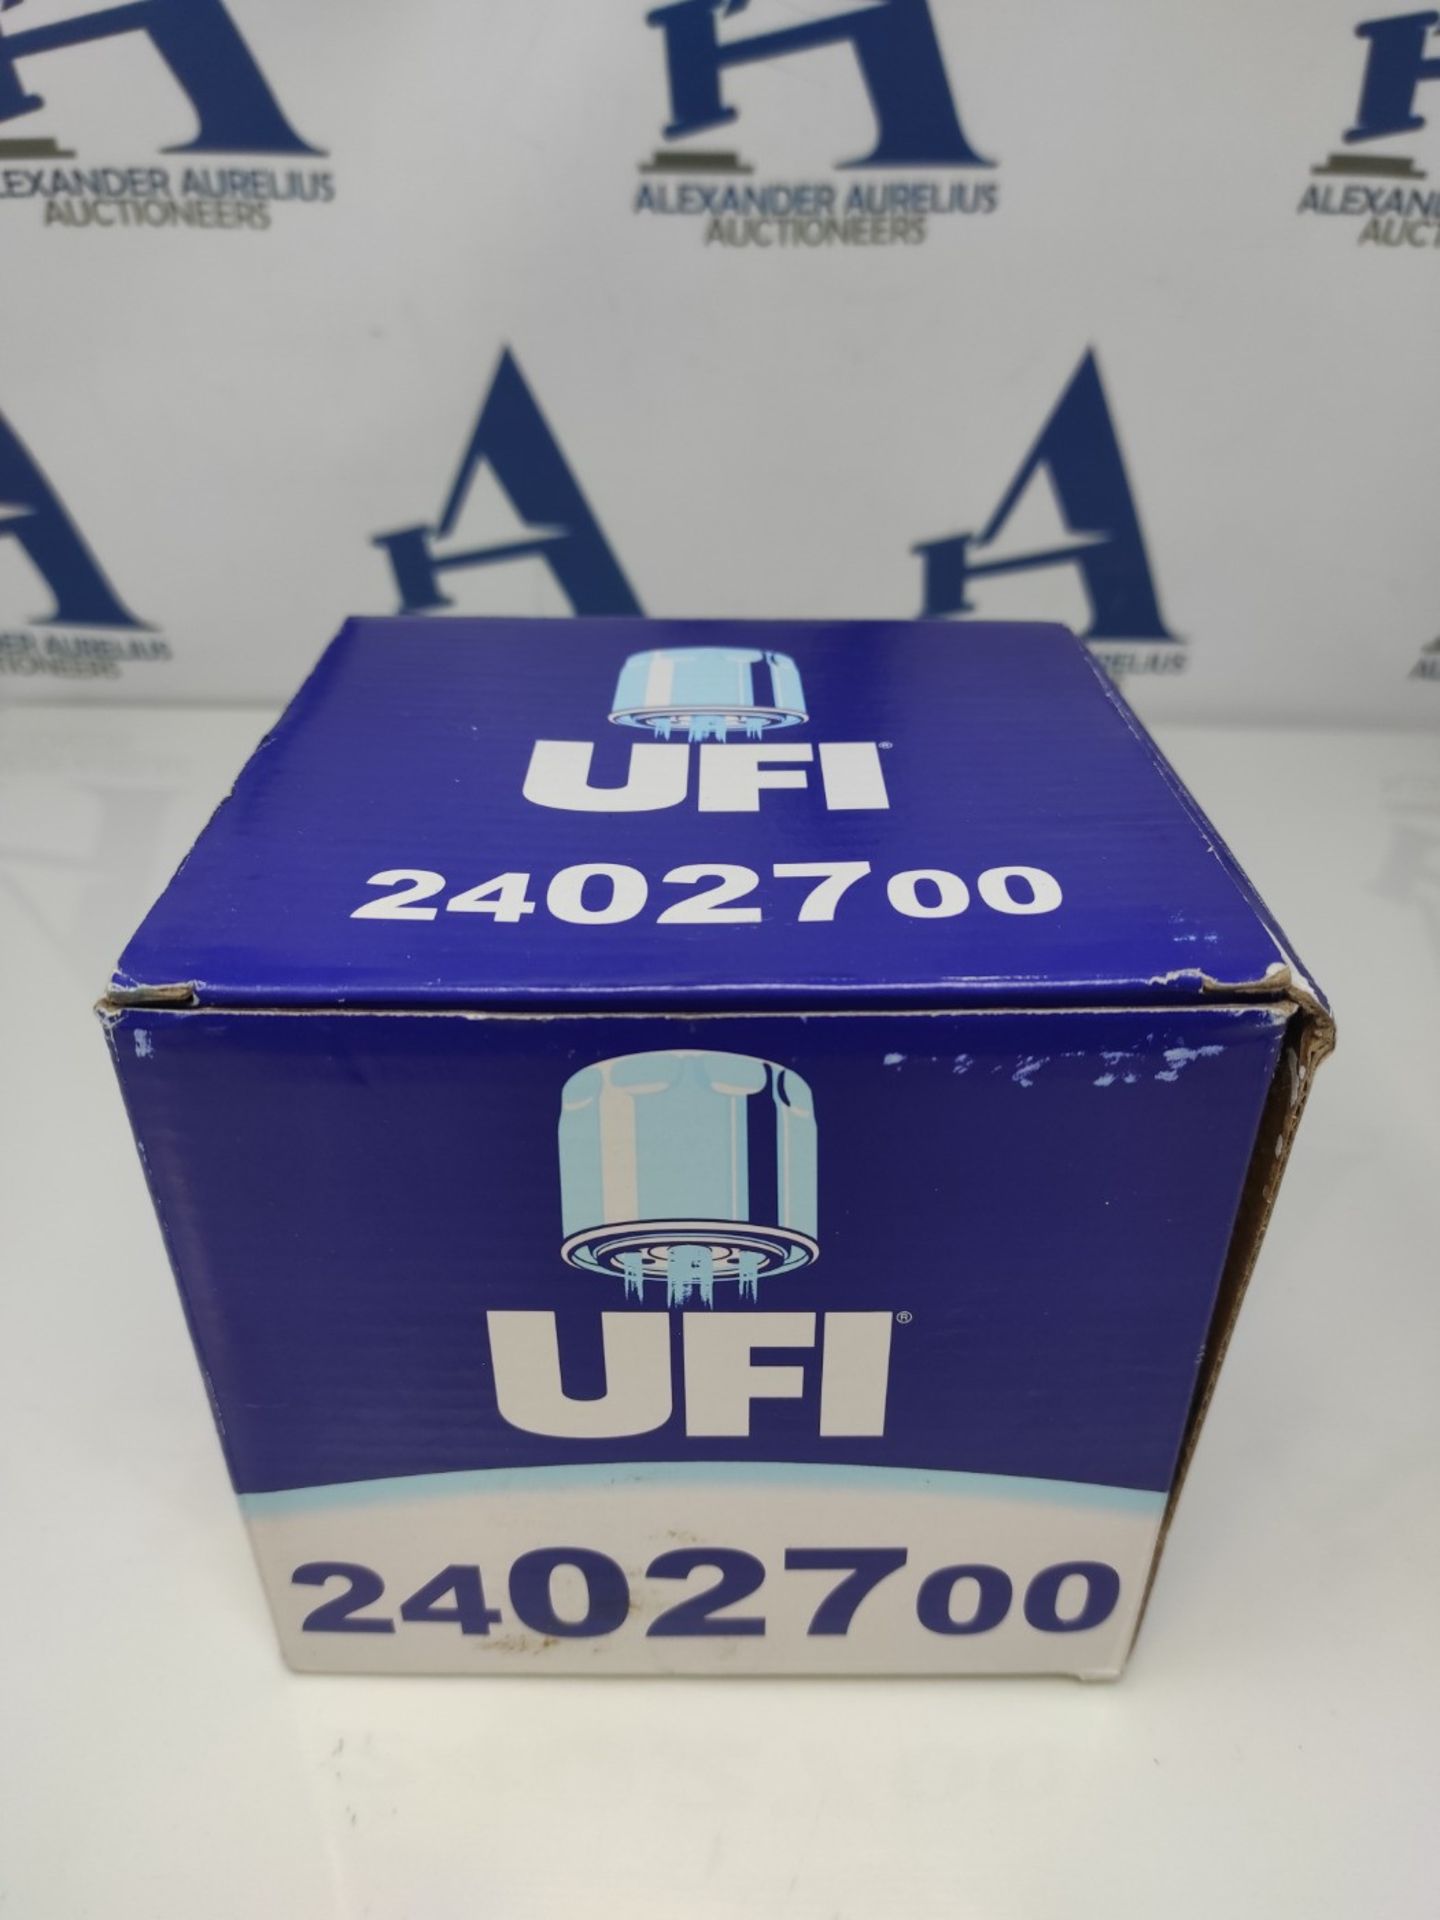 UFI Filters, Diesel Filter 24.027.00, Fuel Filter for Replacement, Suitable for Cars, - Image 2 of 3